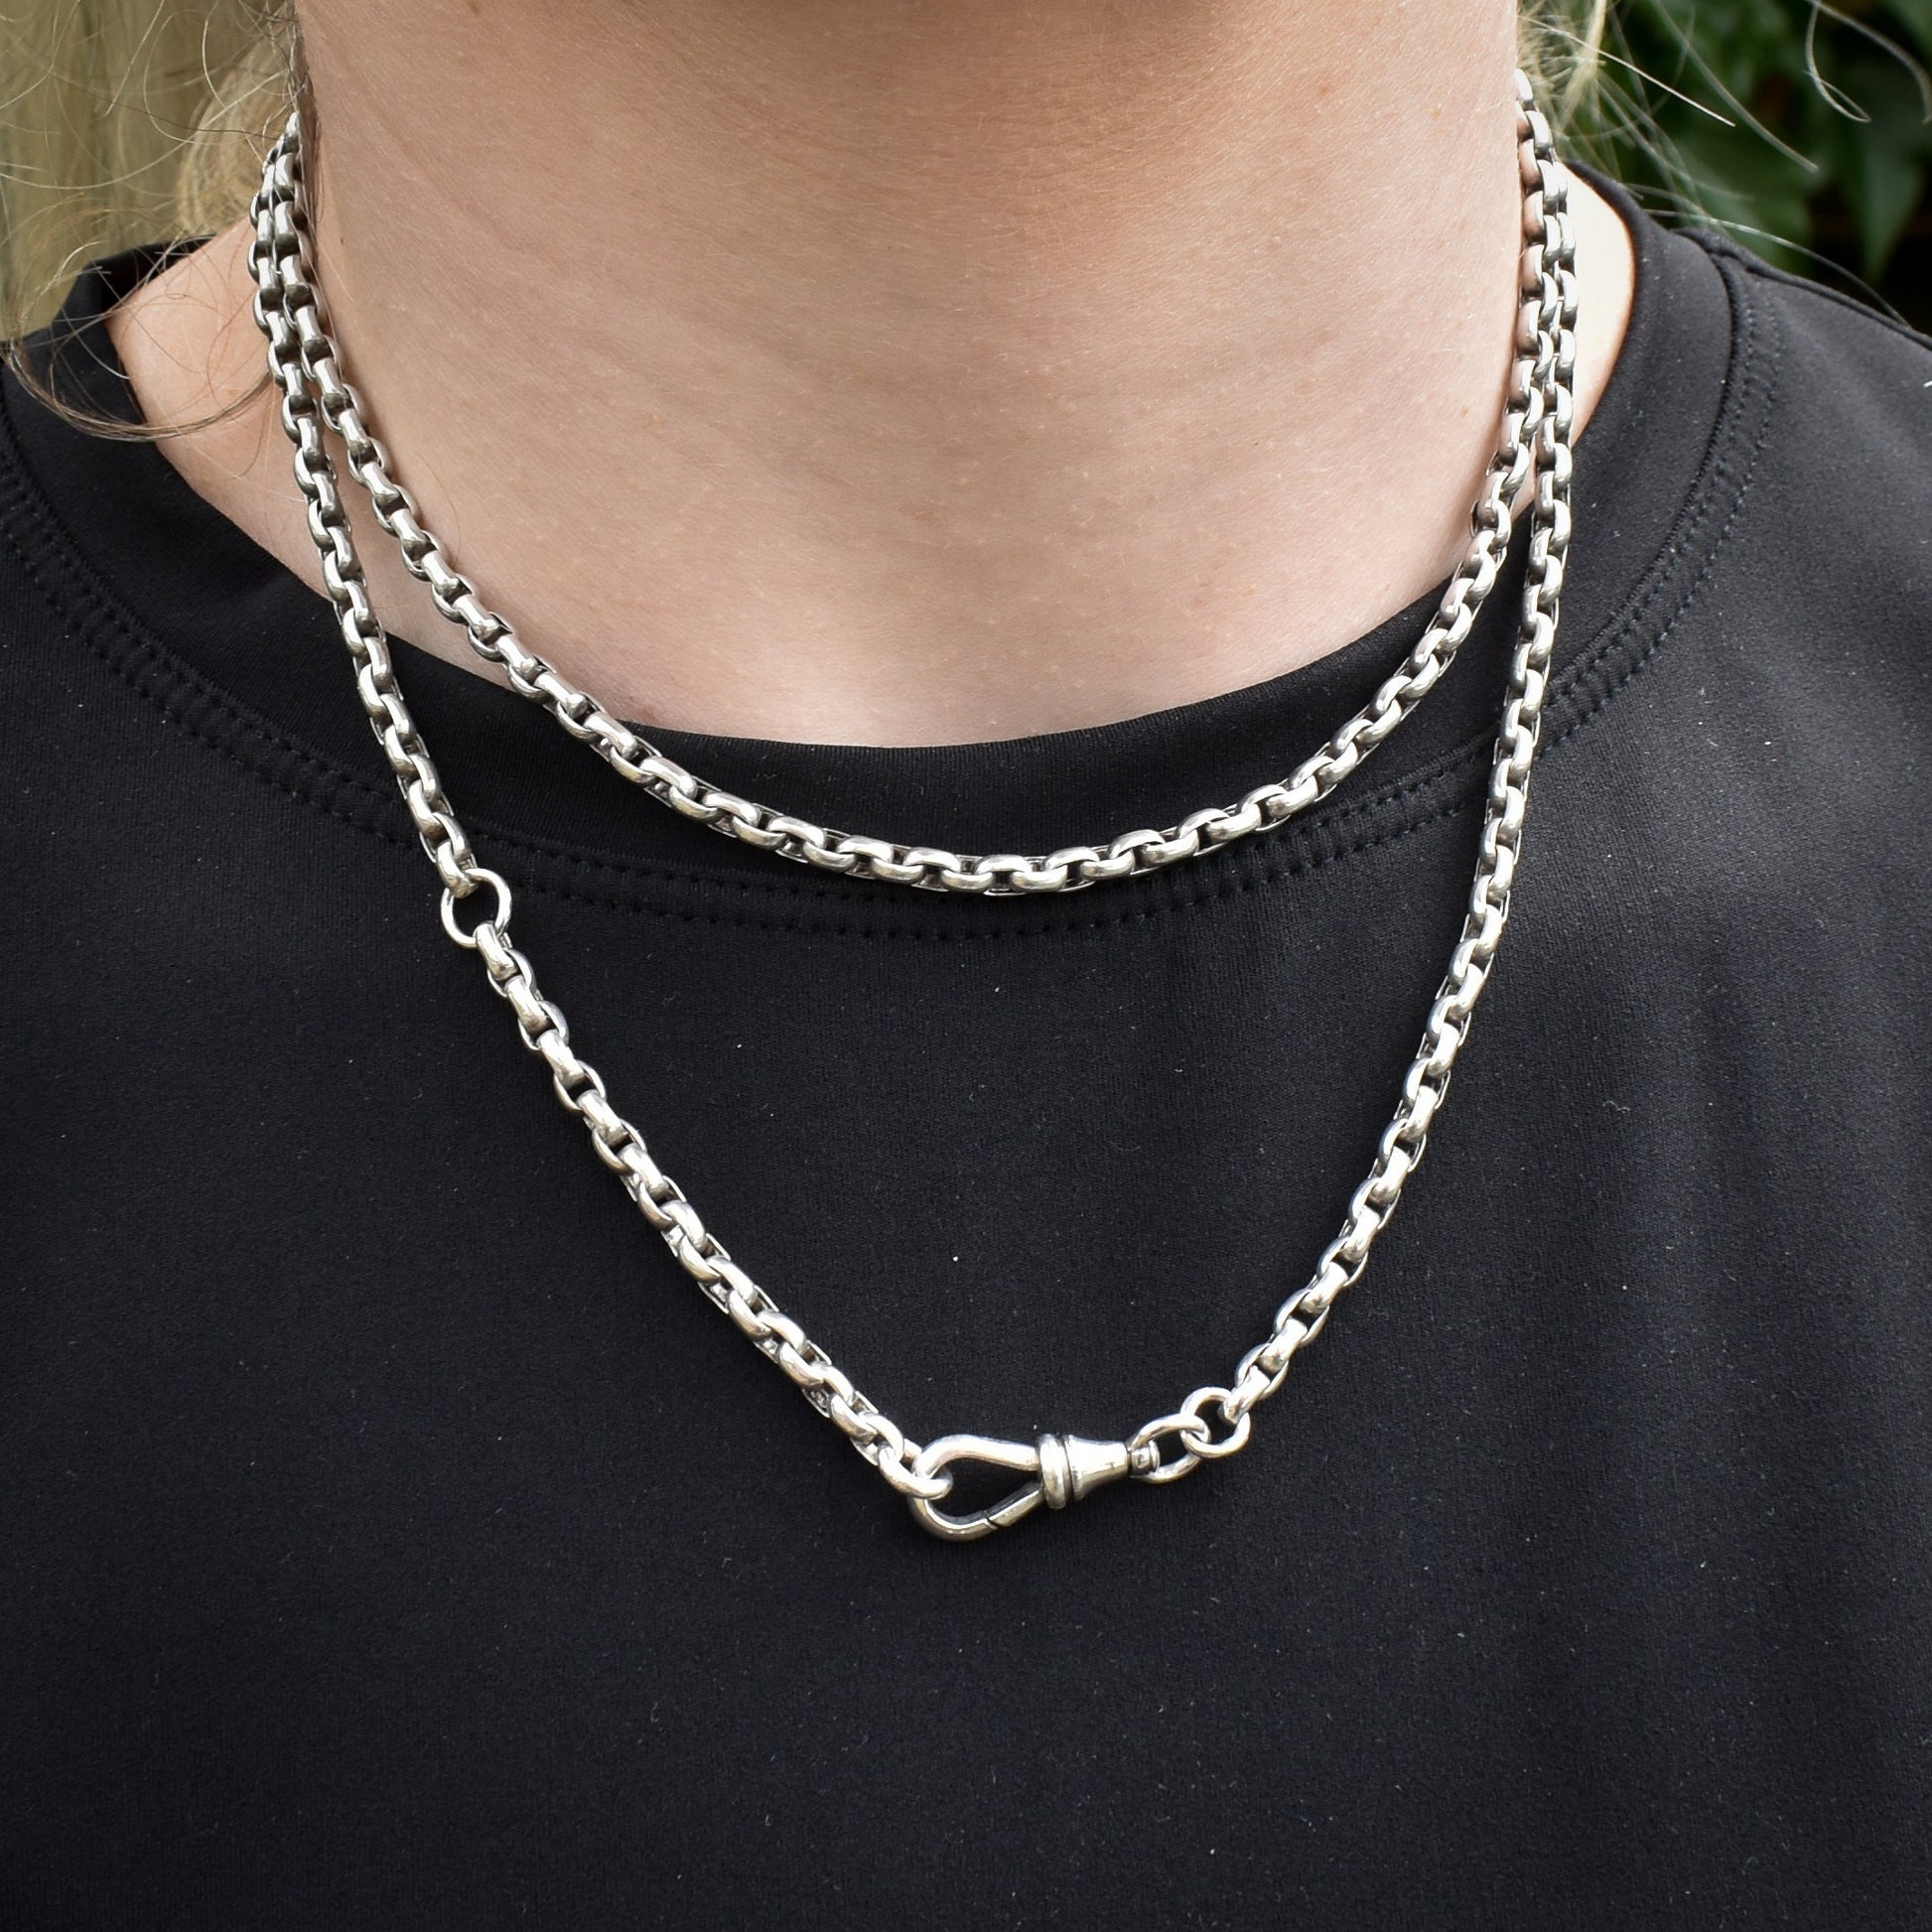 Antique Sterling Silver Long Guard Muff Chain Necklace with Dog Clip | 30" Length